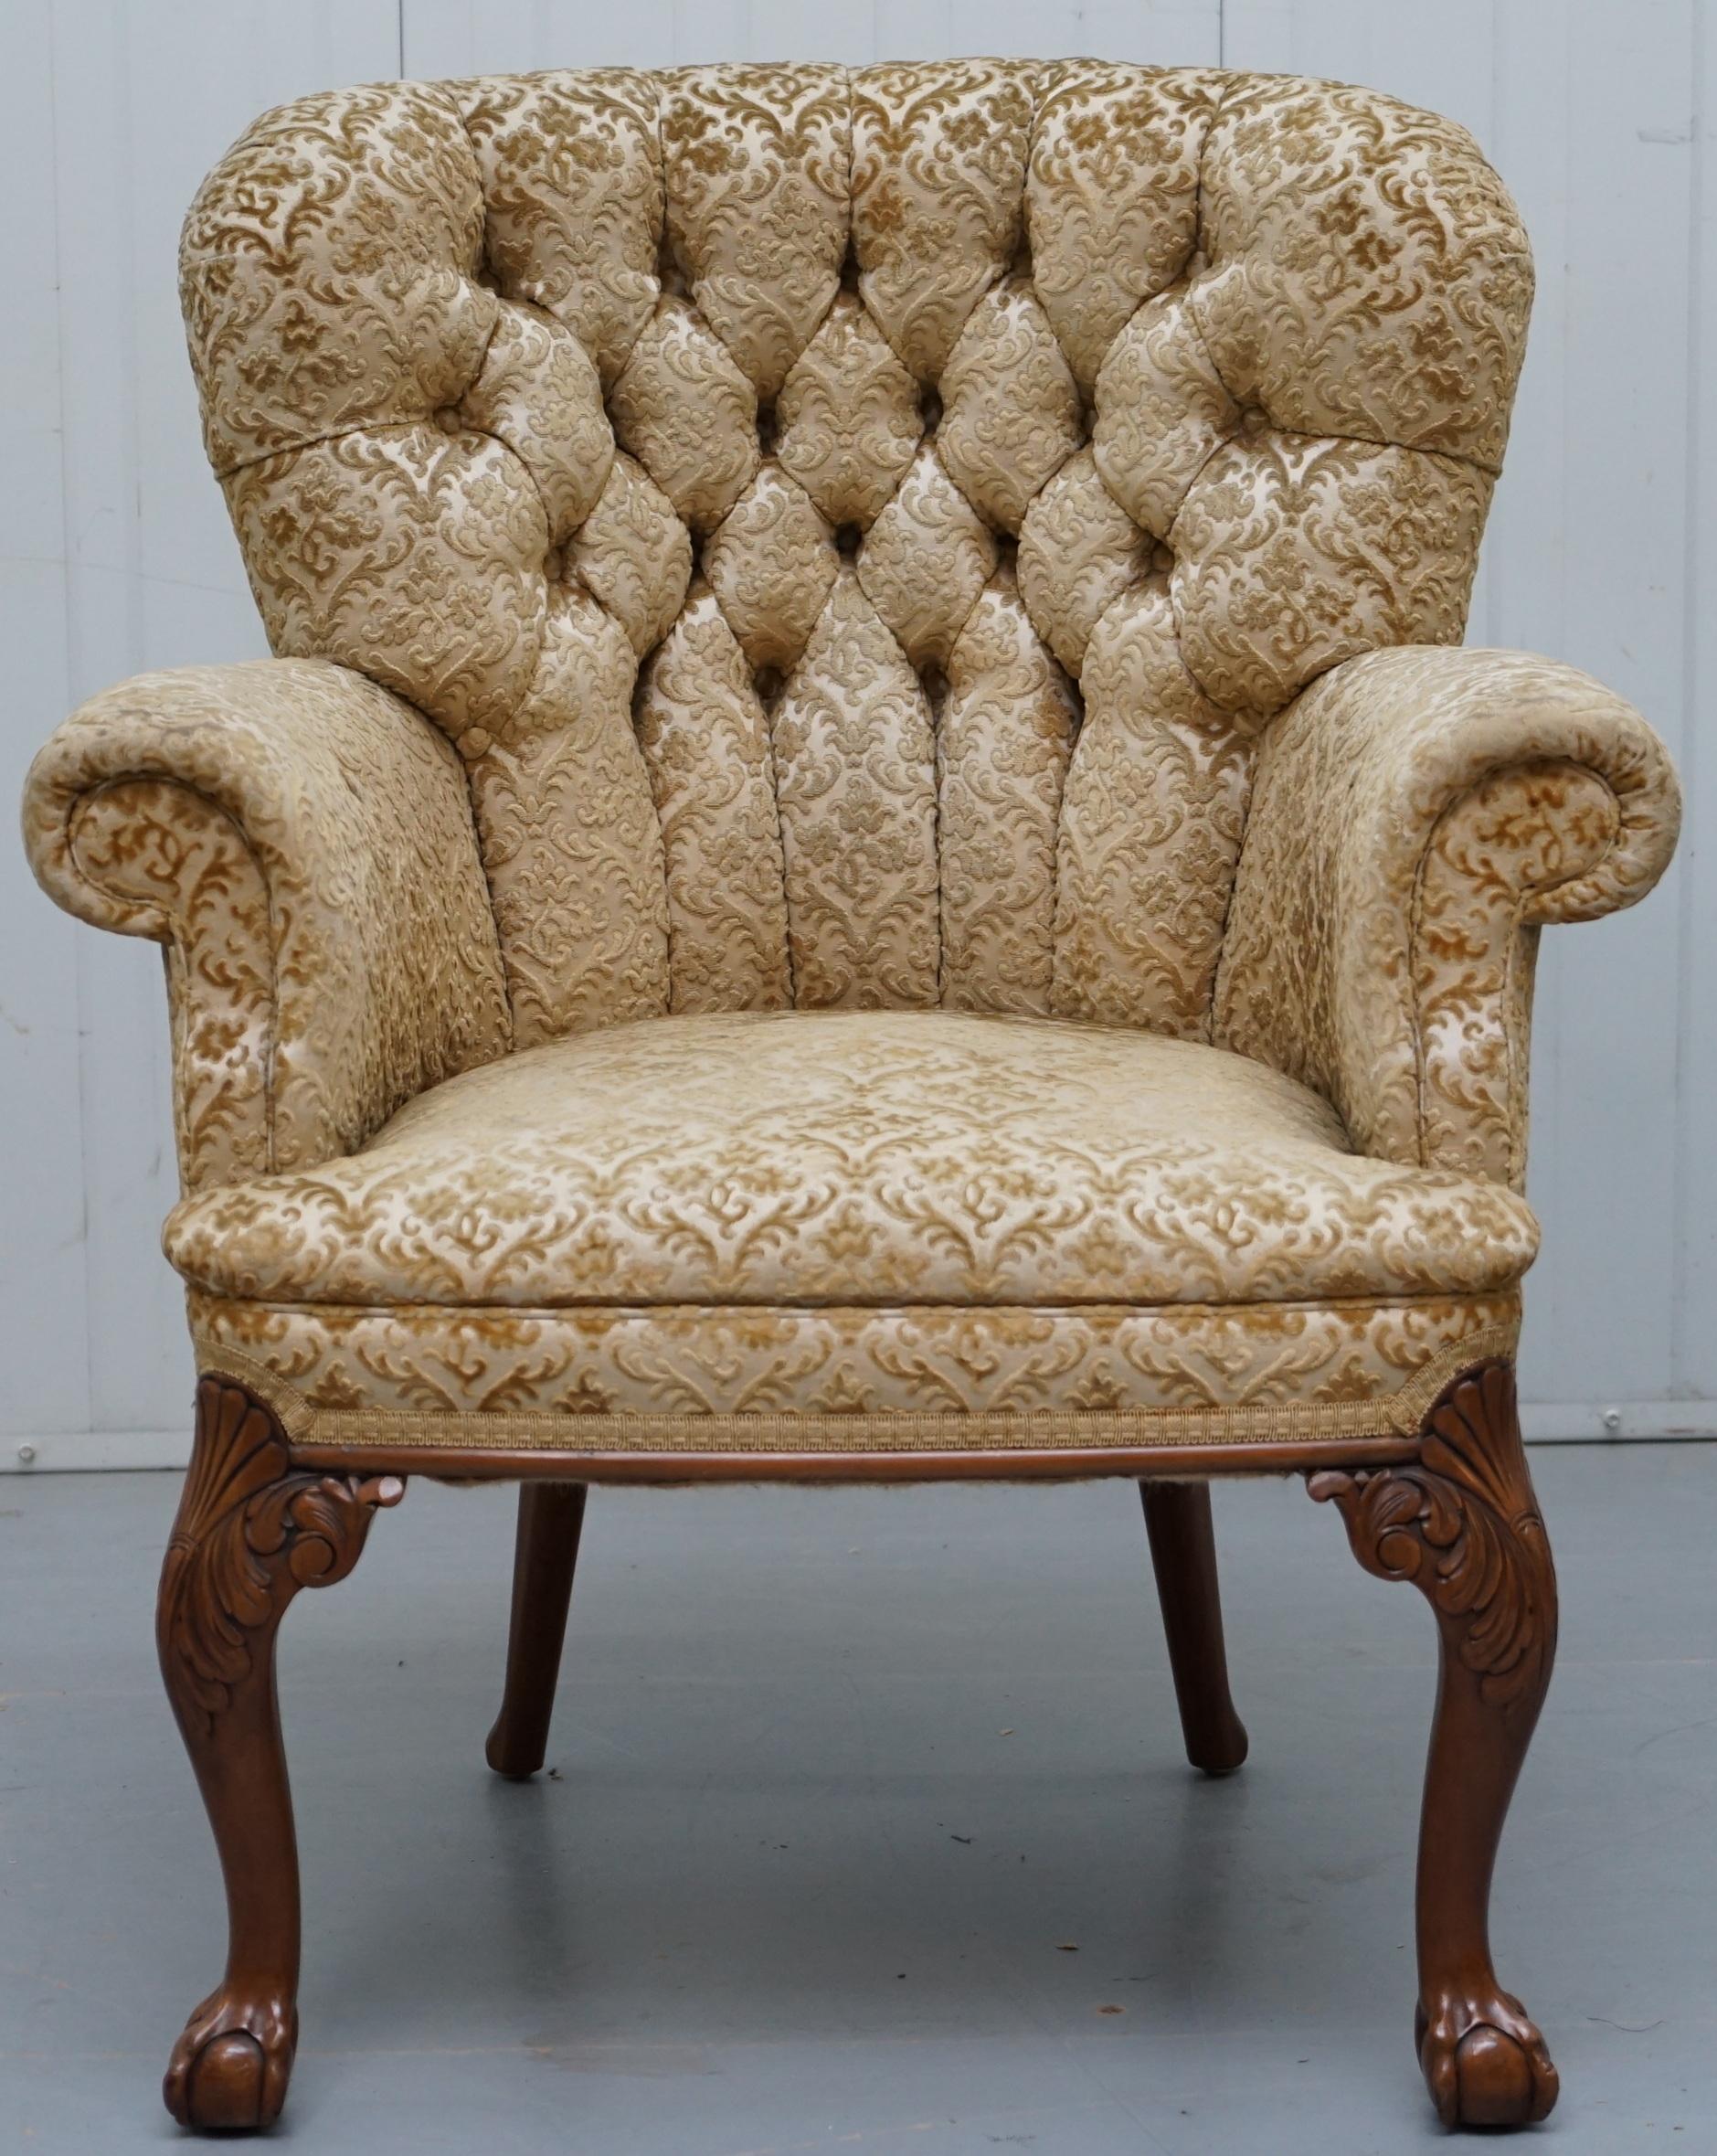 We are delighted to offer this very rare George II style Chesterfield buttoned occasional armchair with ornate hand carved cabriolet legs which start with acanthus leaves and finish with claw and balls.

An exquisite looking and very comfortable